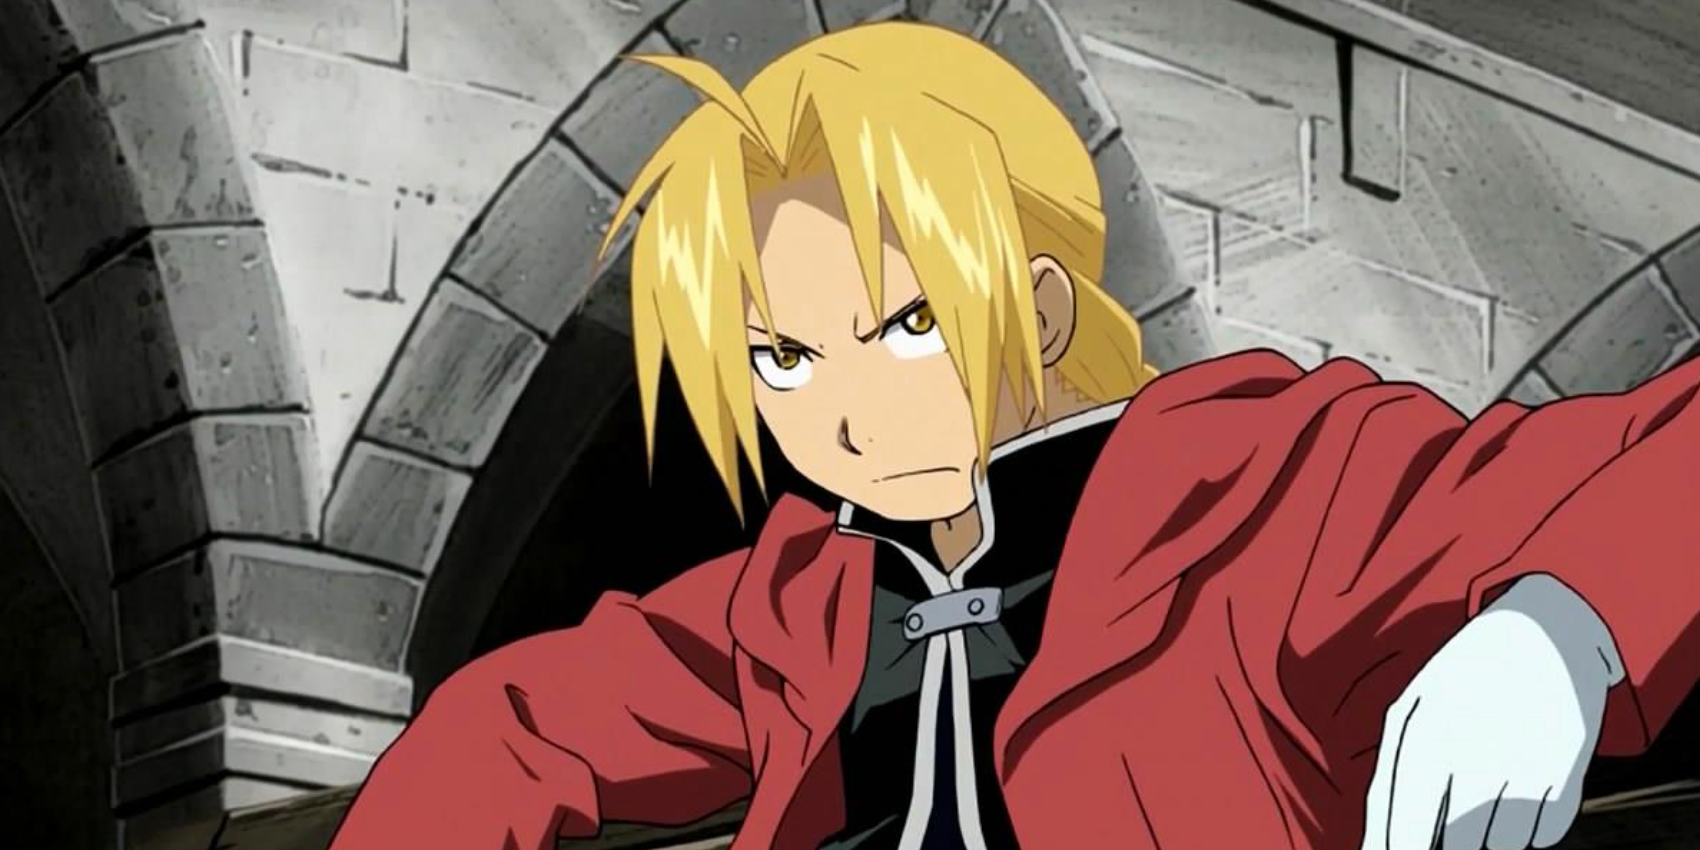 Ed Elric from FMA scowling